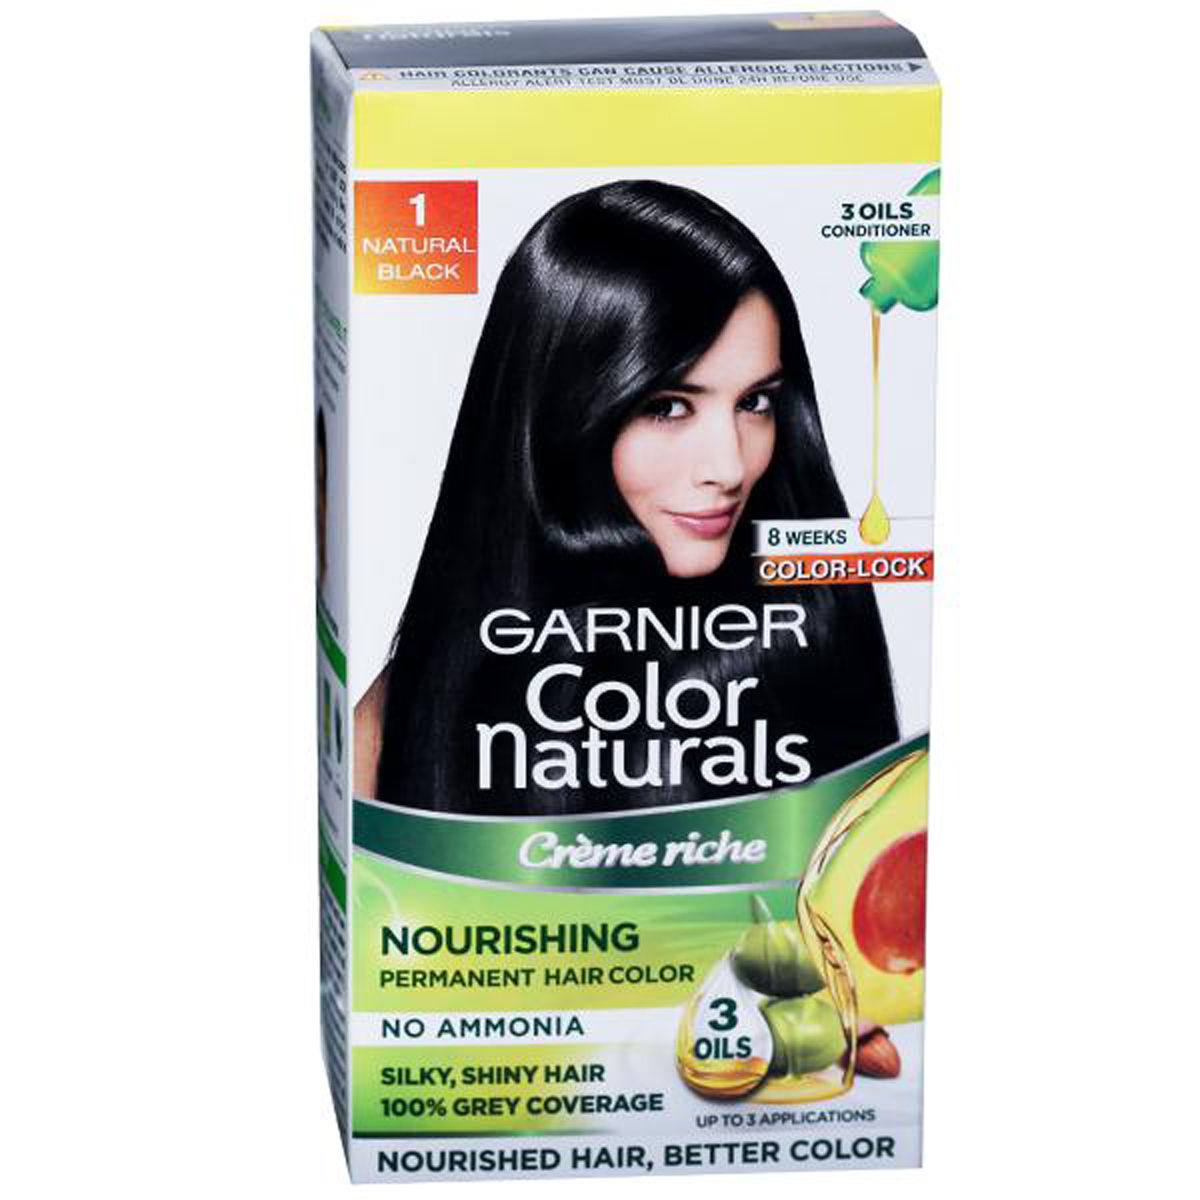 Garnier Color Naturals Creme Shade 1 Natural Black Hair Colour, 1 Kit Price,  Uses, Side Effects, Composition - Apollo Pharmacy